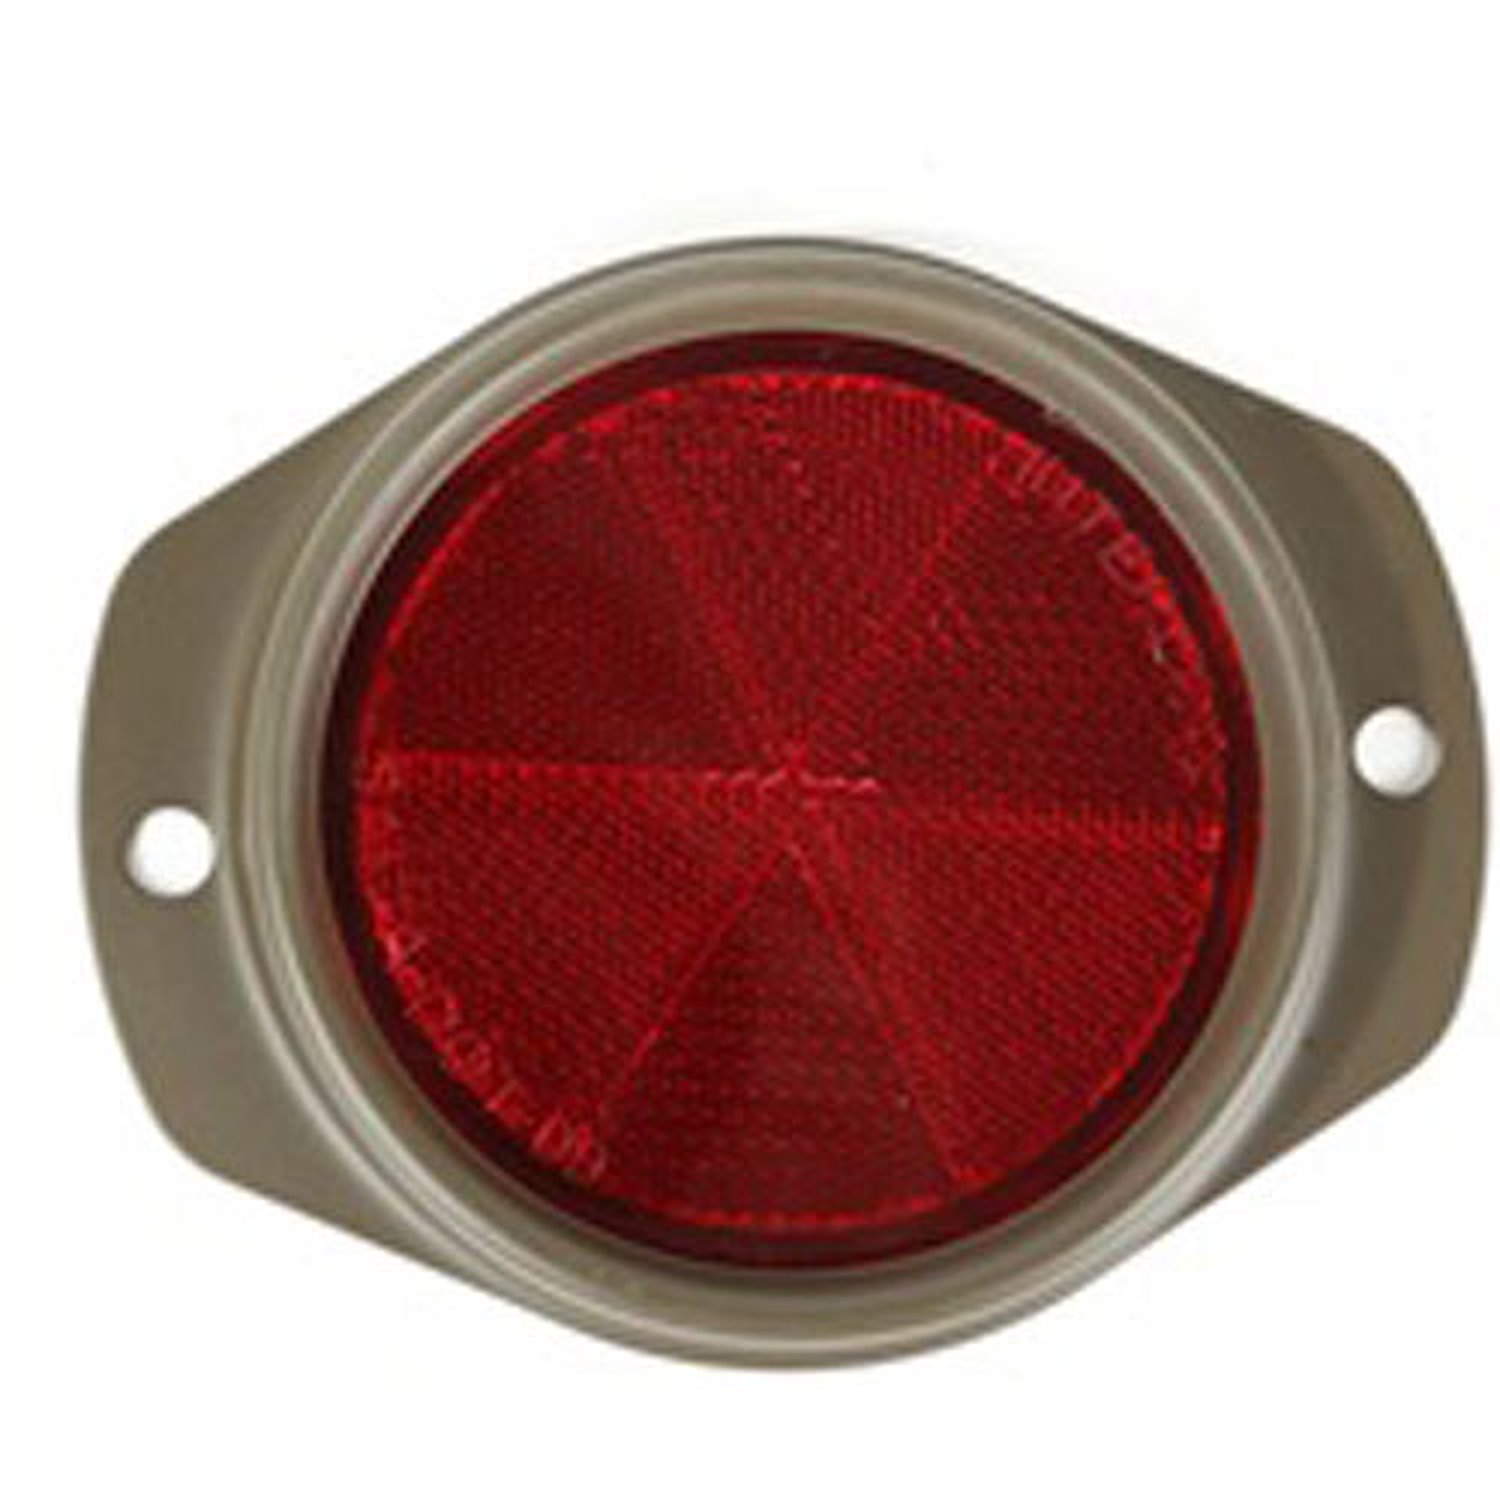 This military-style olive drab reflector from Omix-ADA has a red lense and fits 41-45 Ford GPW and Willys MB.